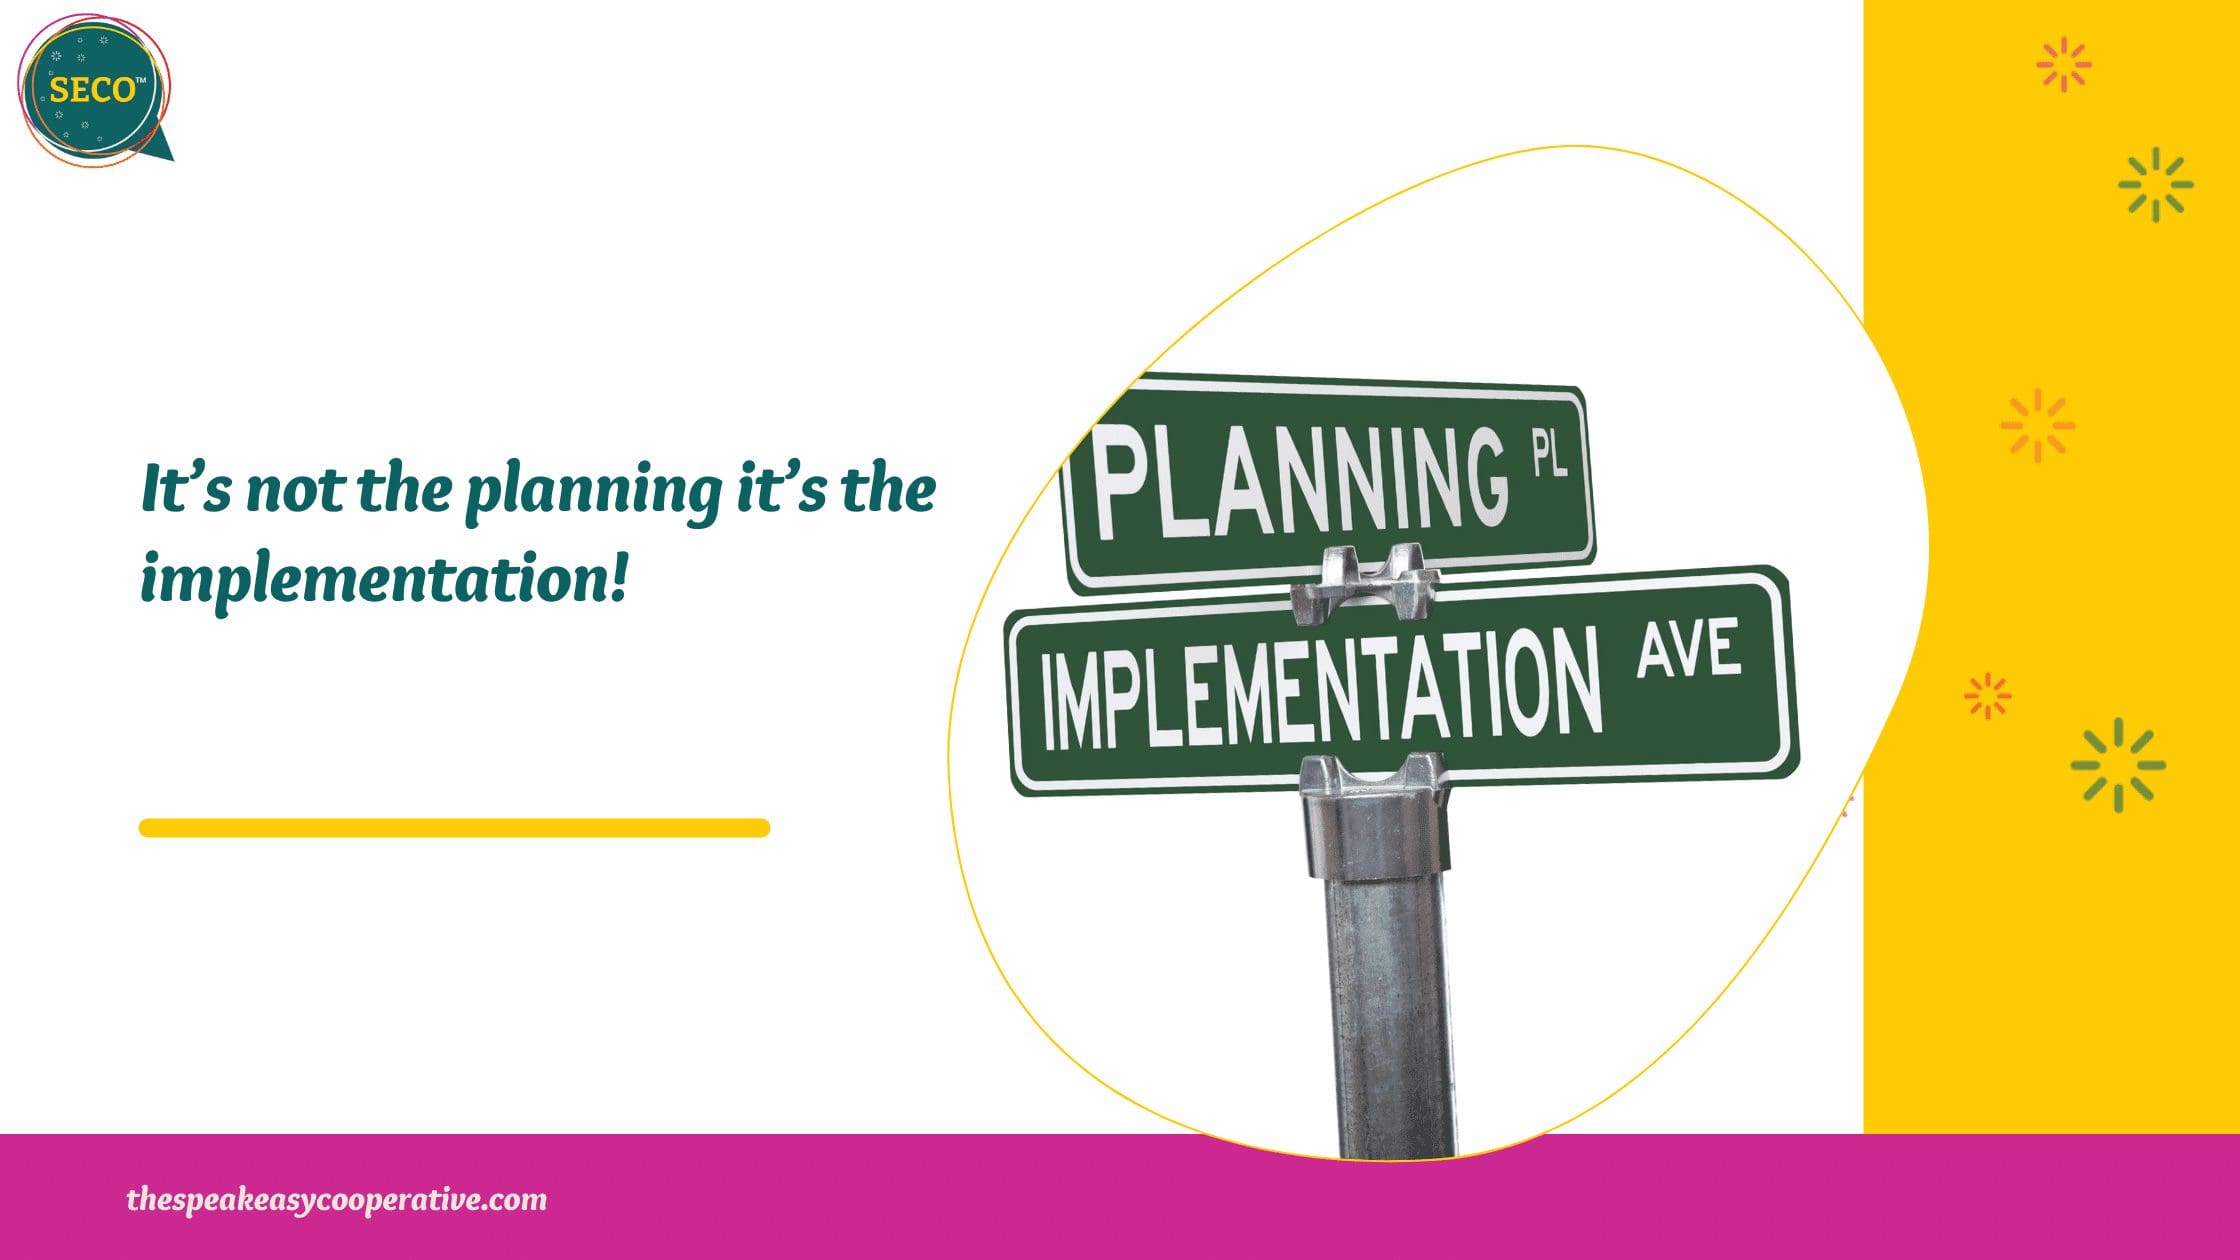 It's not the planning its the implementation.